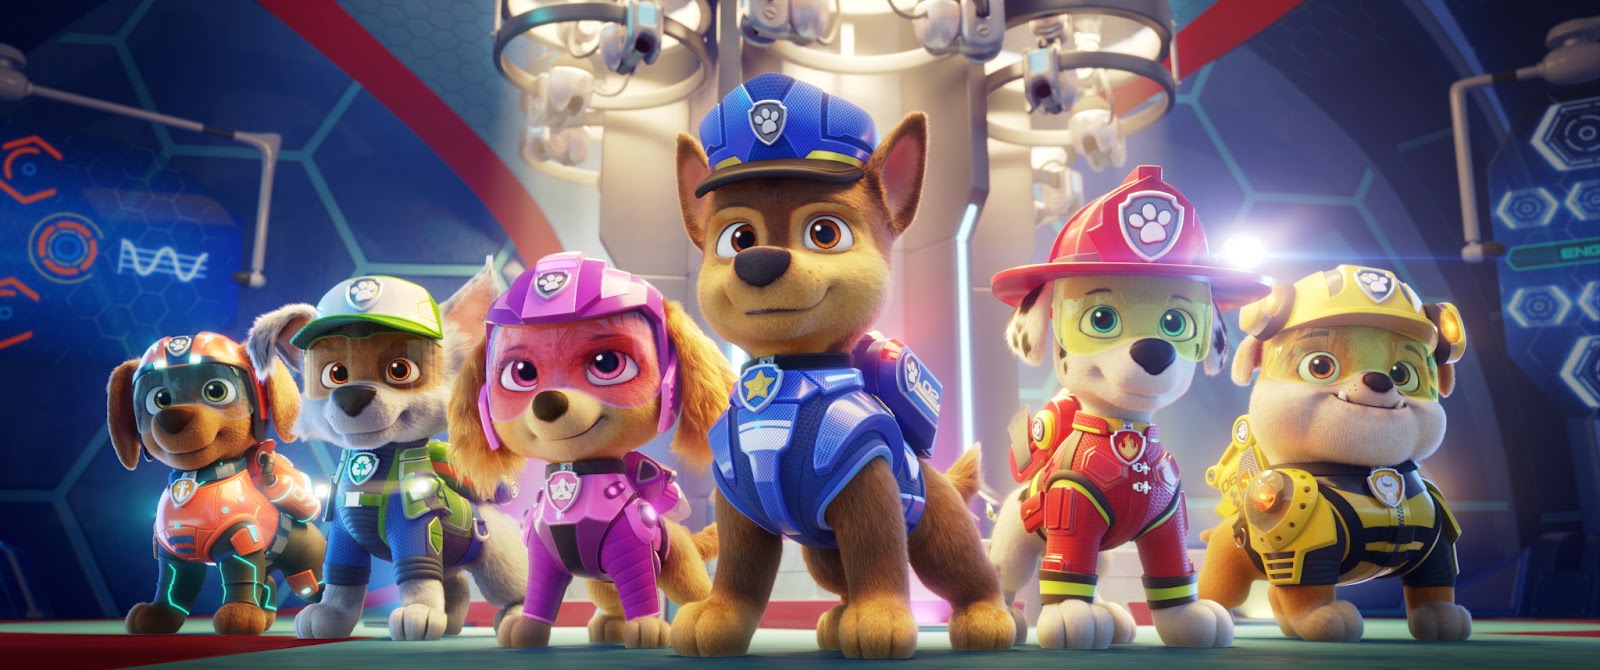 The Mighty Pups are at American Dream! This weekend to celebrate the r, PAW Patrol